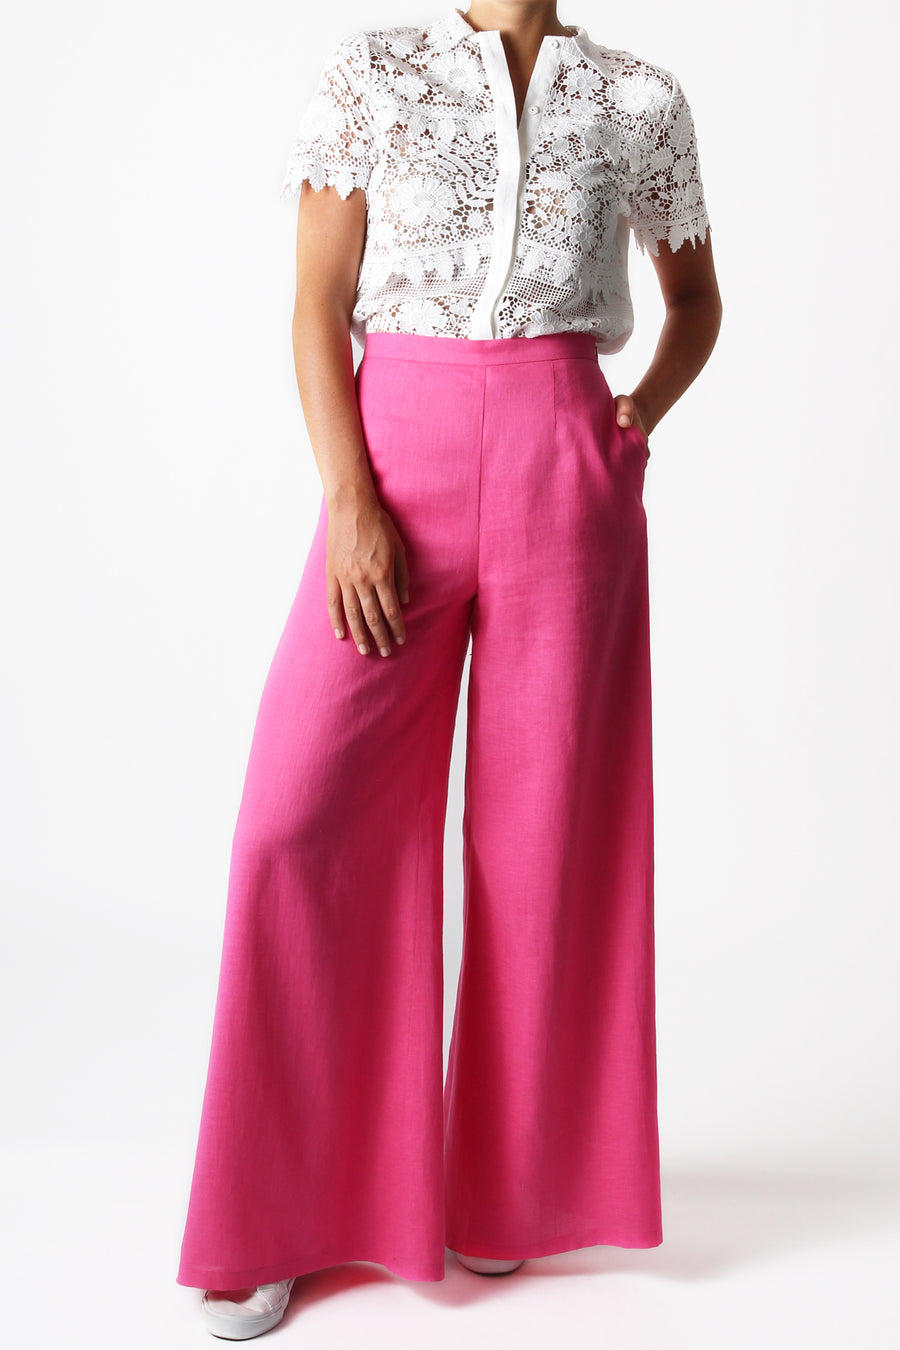 This is a photo of a woman from the neck down, she is wearing a button front, lace tired blouse tucked into a pair of bright pink, flare leg pants. She has her hand in the left side pocket of the pants.